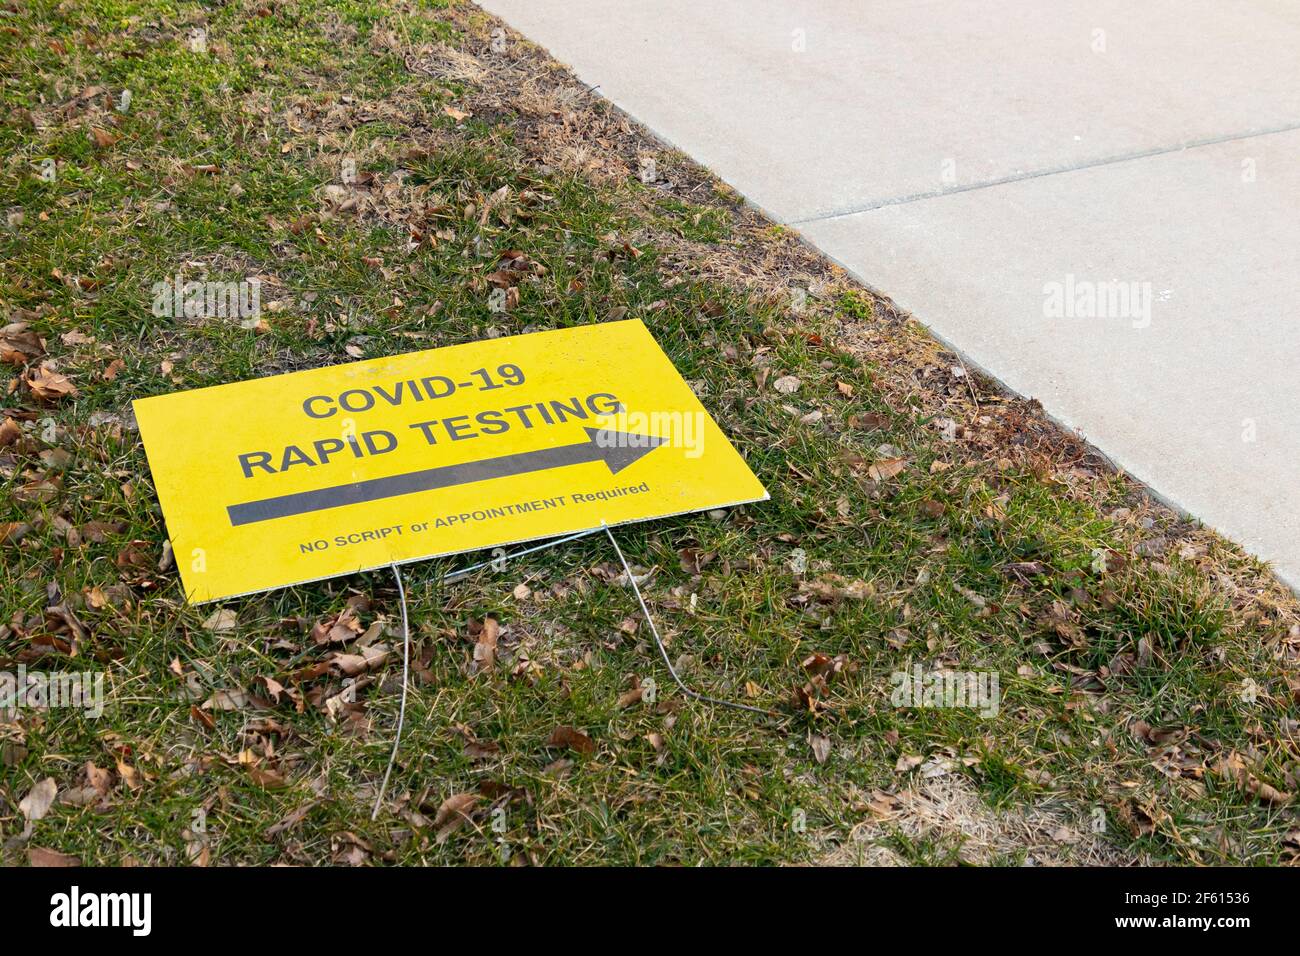 COVID-19 pandemic rapid testing site sign laying on the ground Stock Photo